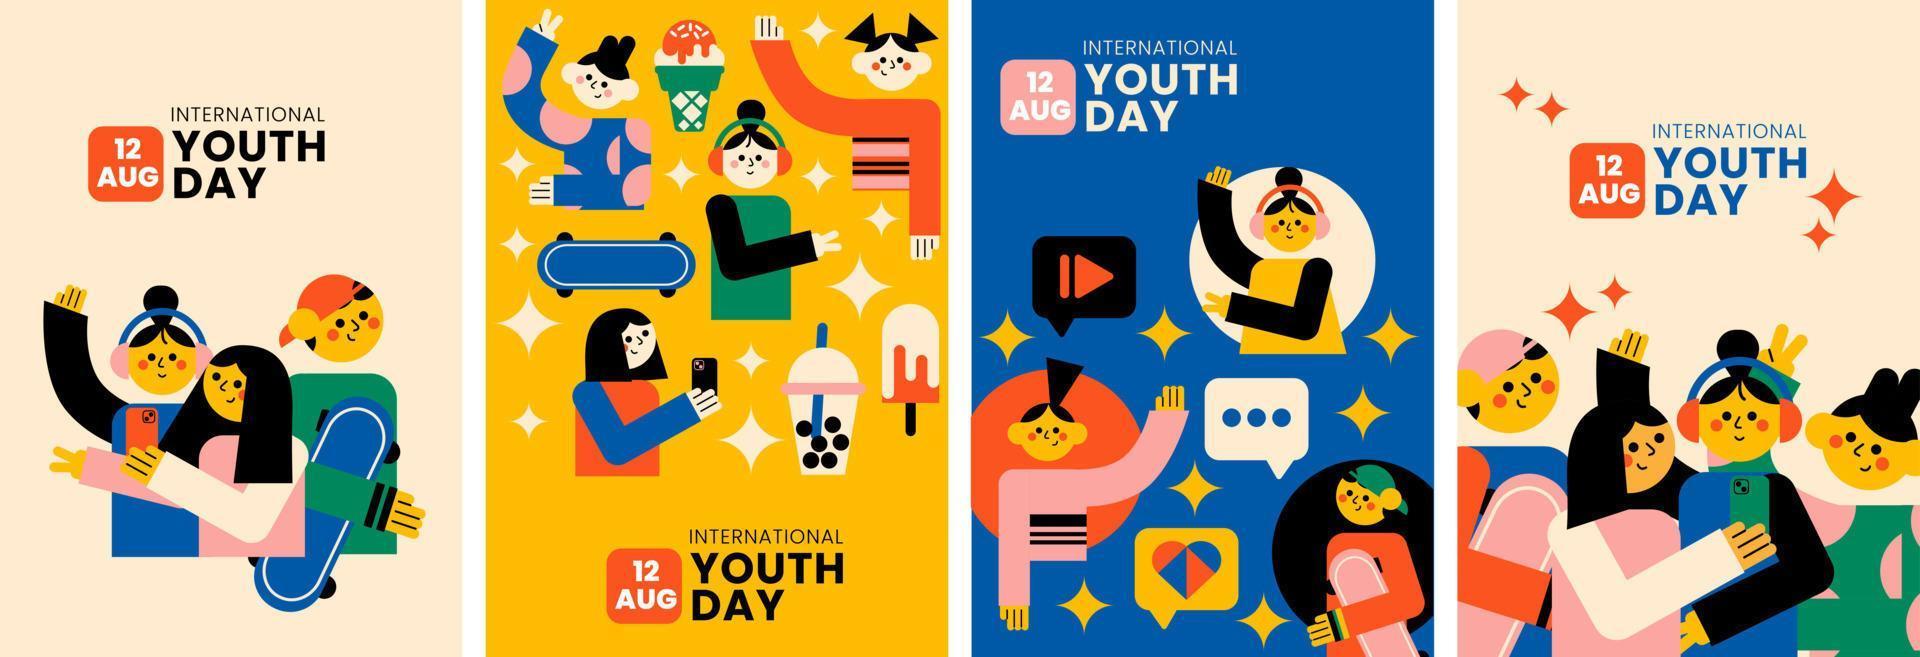 International youth day 21 August geometric vector collection. Book cover, background, set illustration.